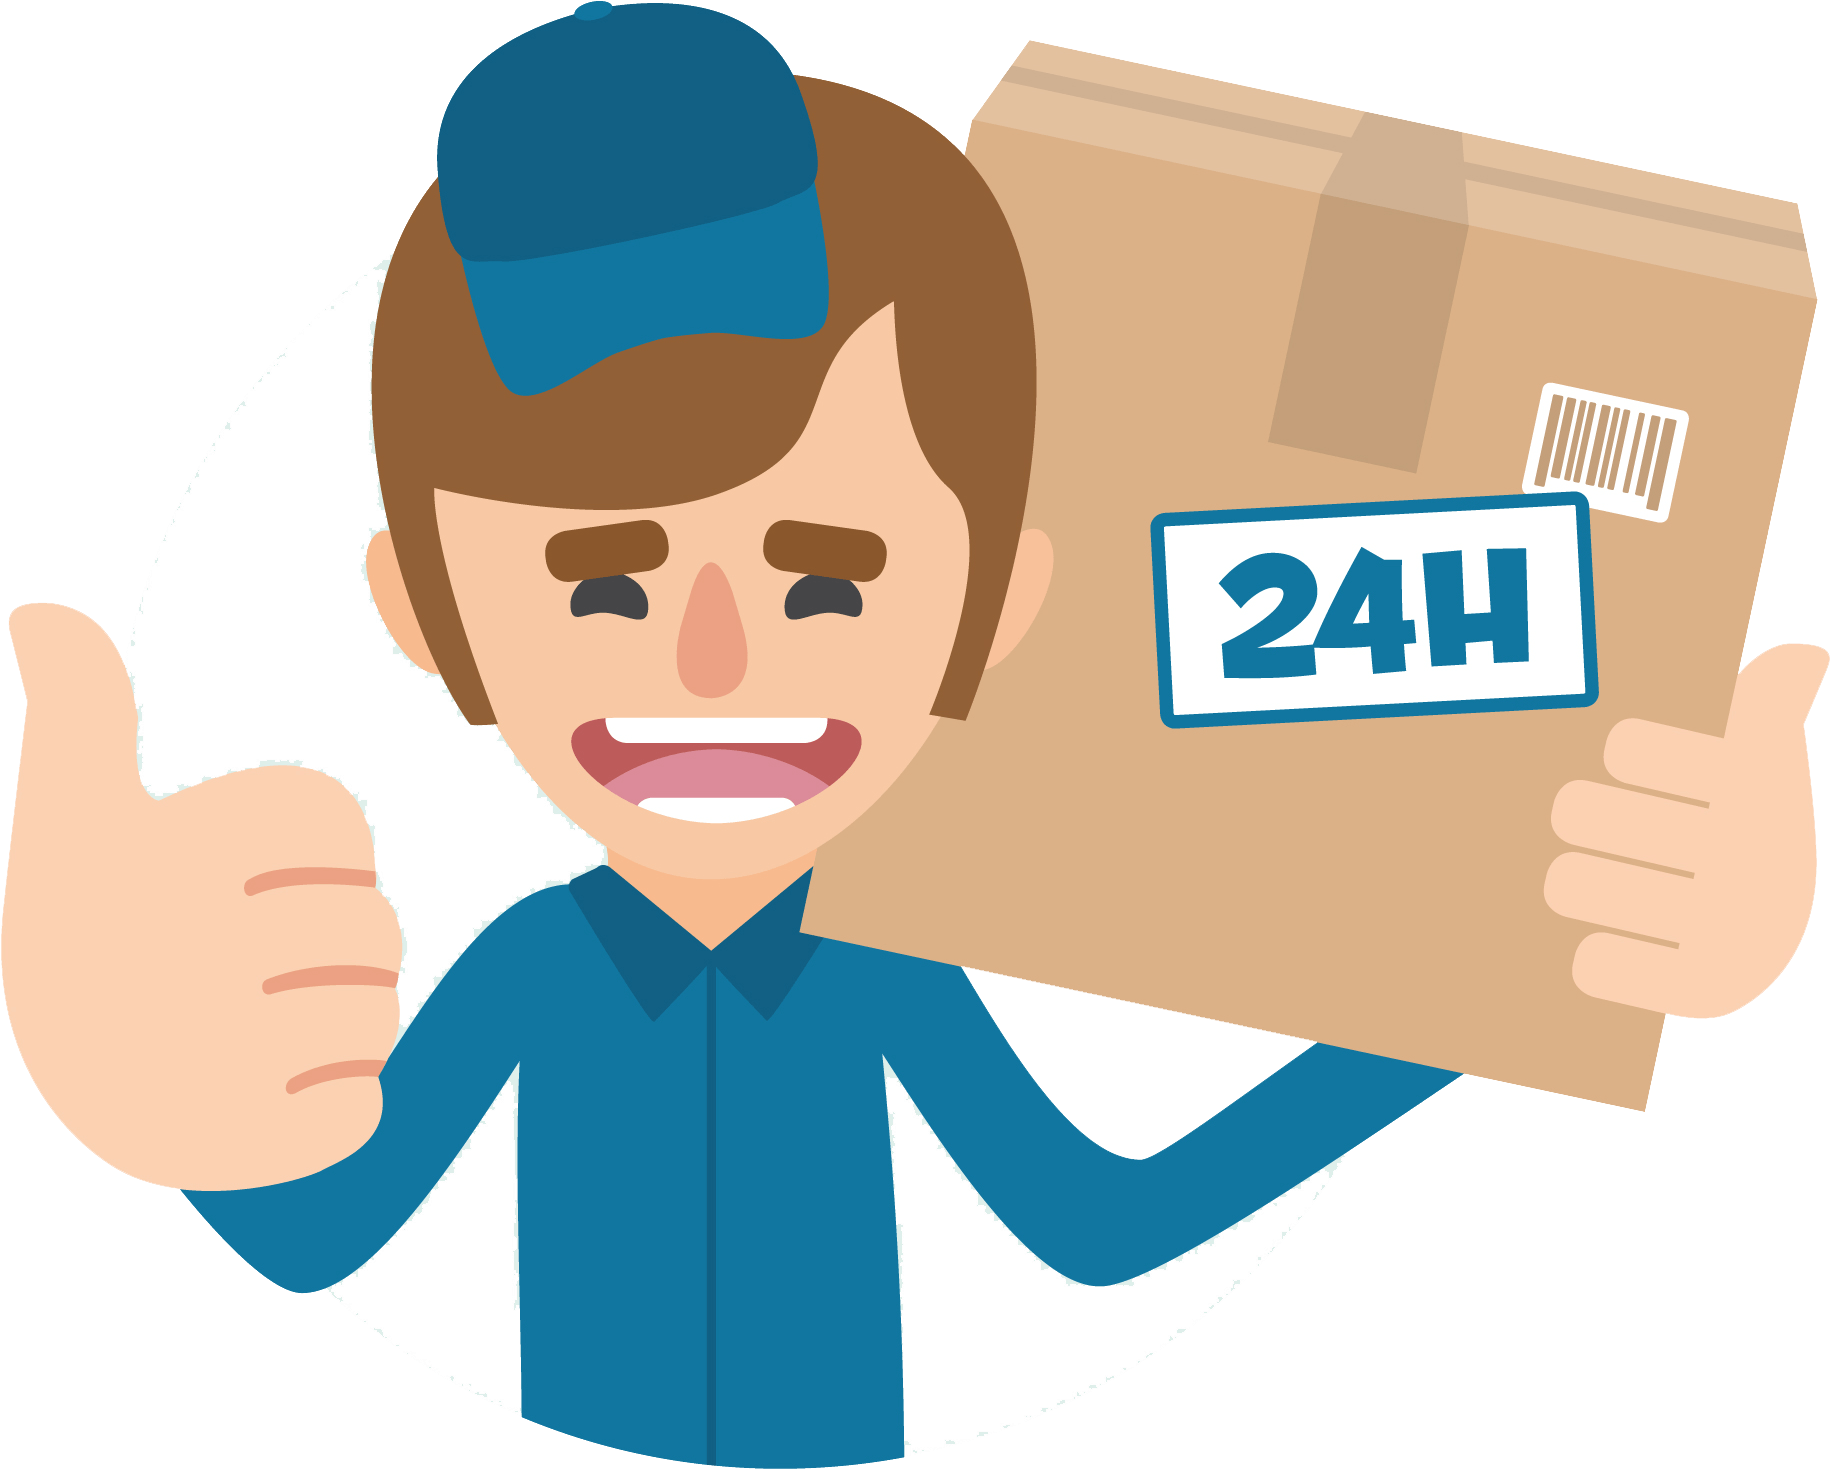 Download and share clipart about Delivery Courier Dhl Express Service E-com...